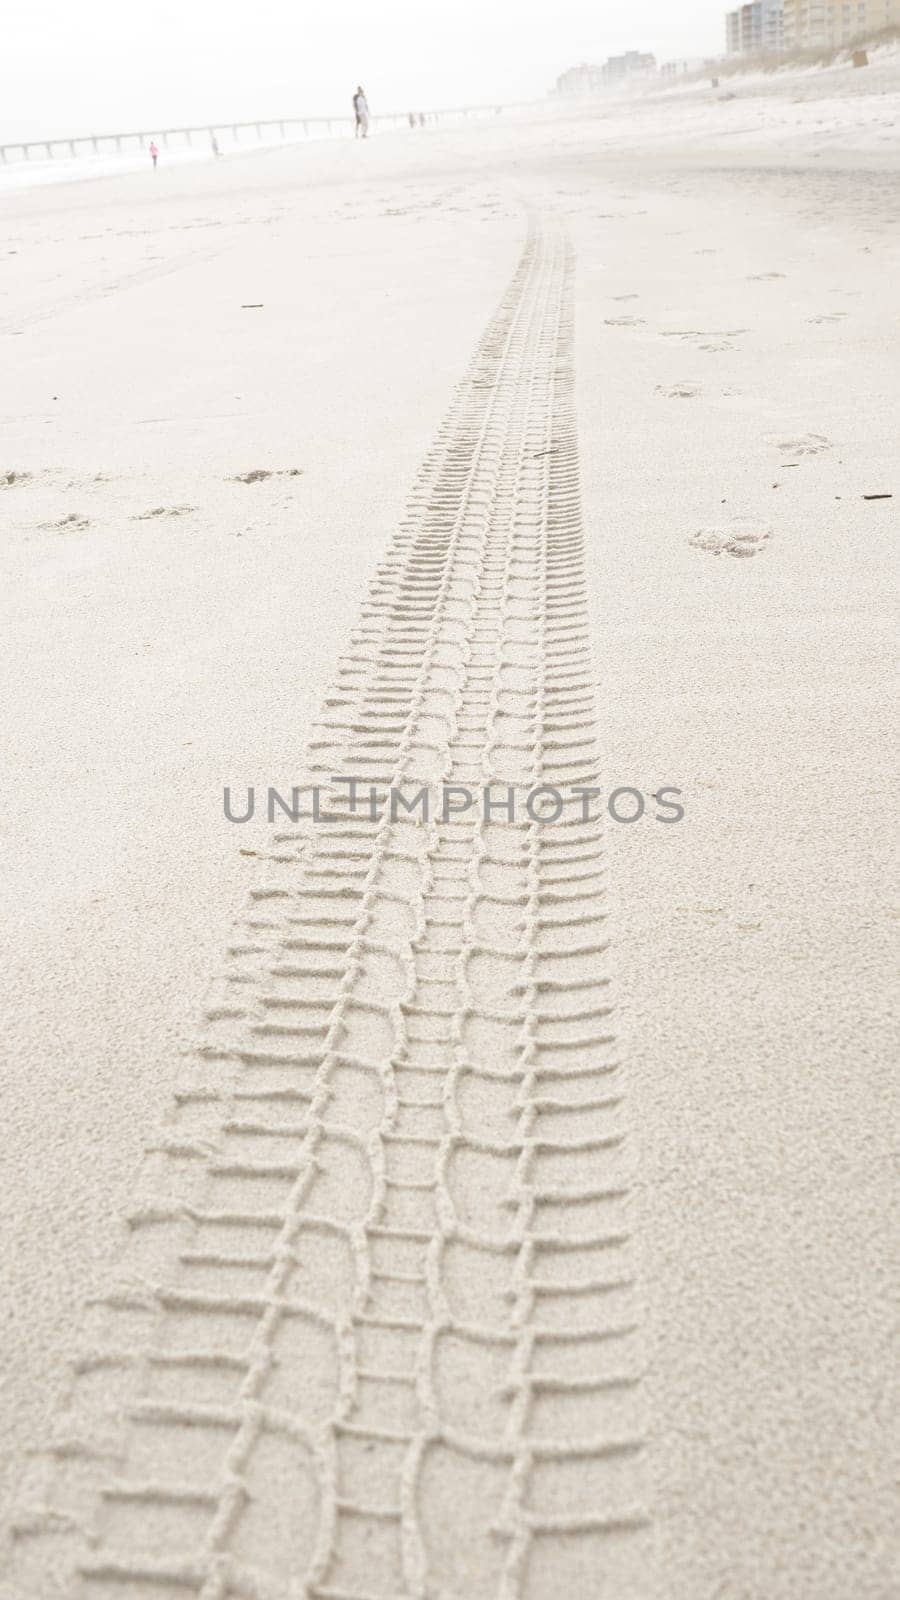 A serene image captures a single tire track delicately etched on the sandy shore, blending human touch with natures beauty in a harmonious display of contrast and tranquility.